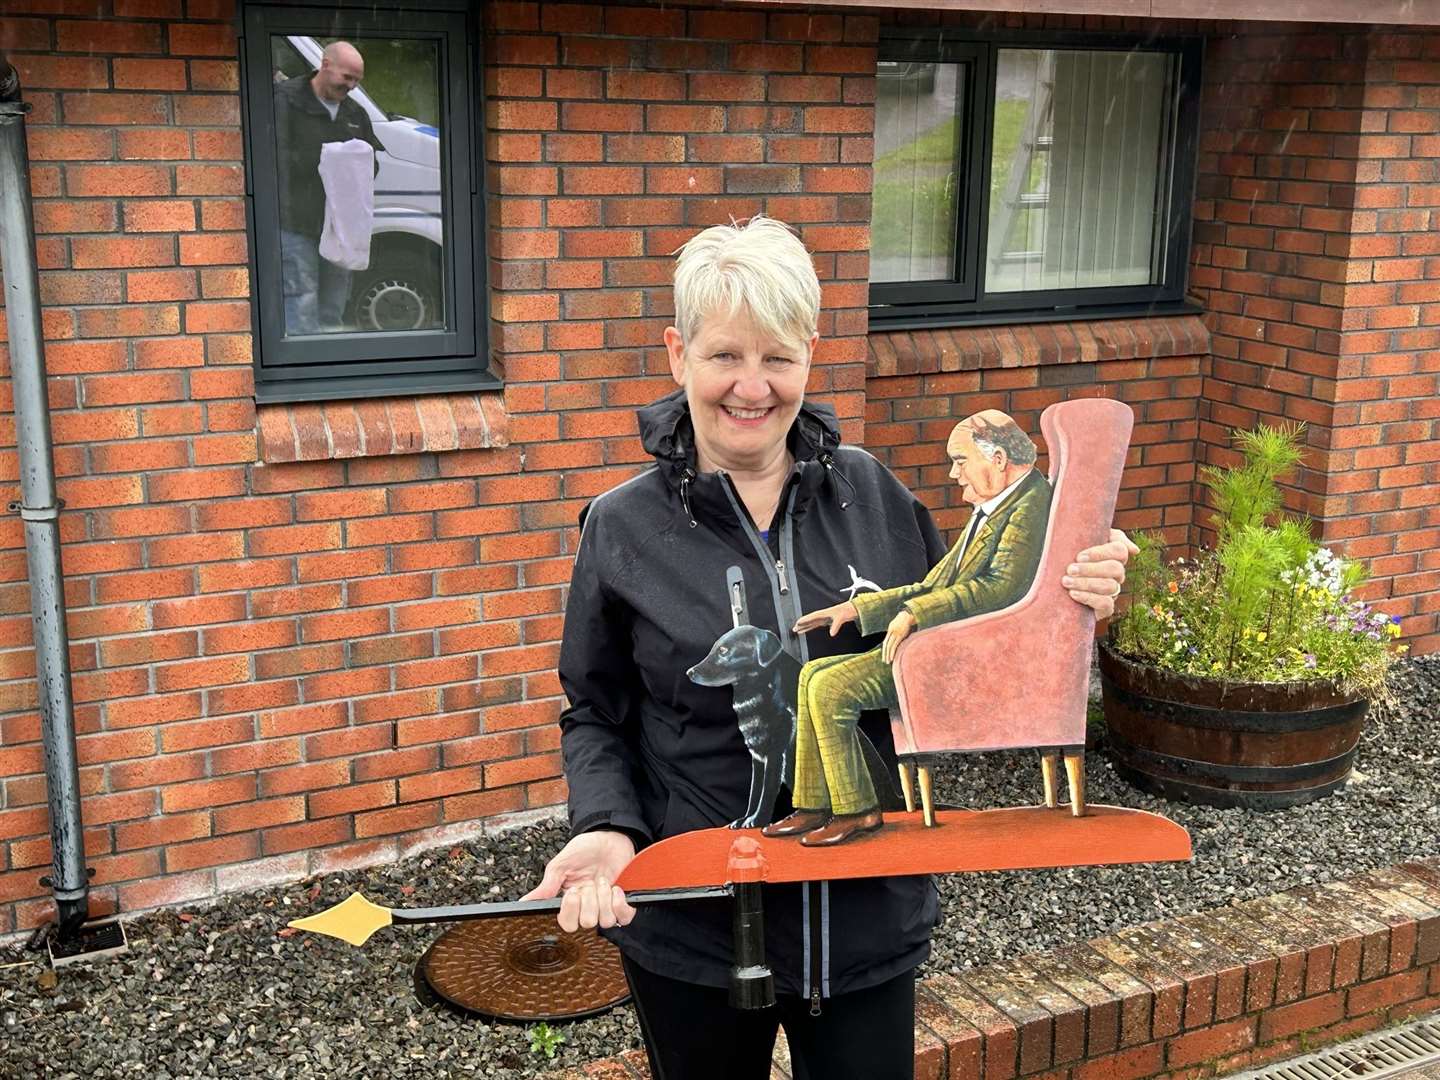 Lorraine Askew is thrilled at the restoration of the weather vane.